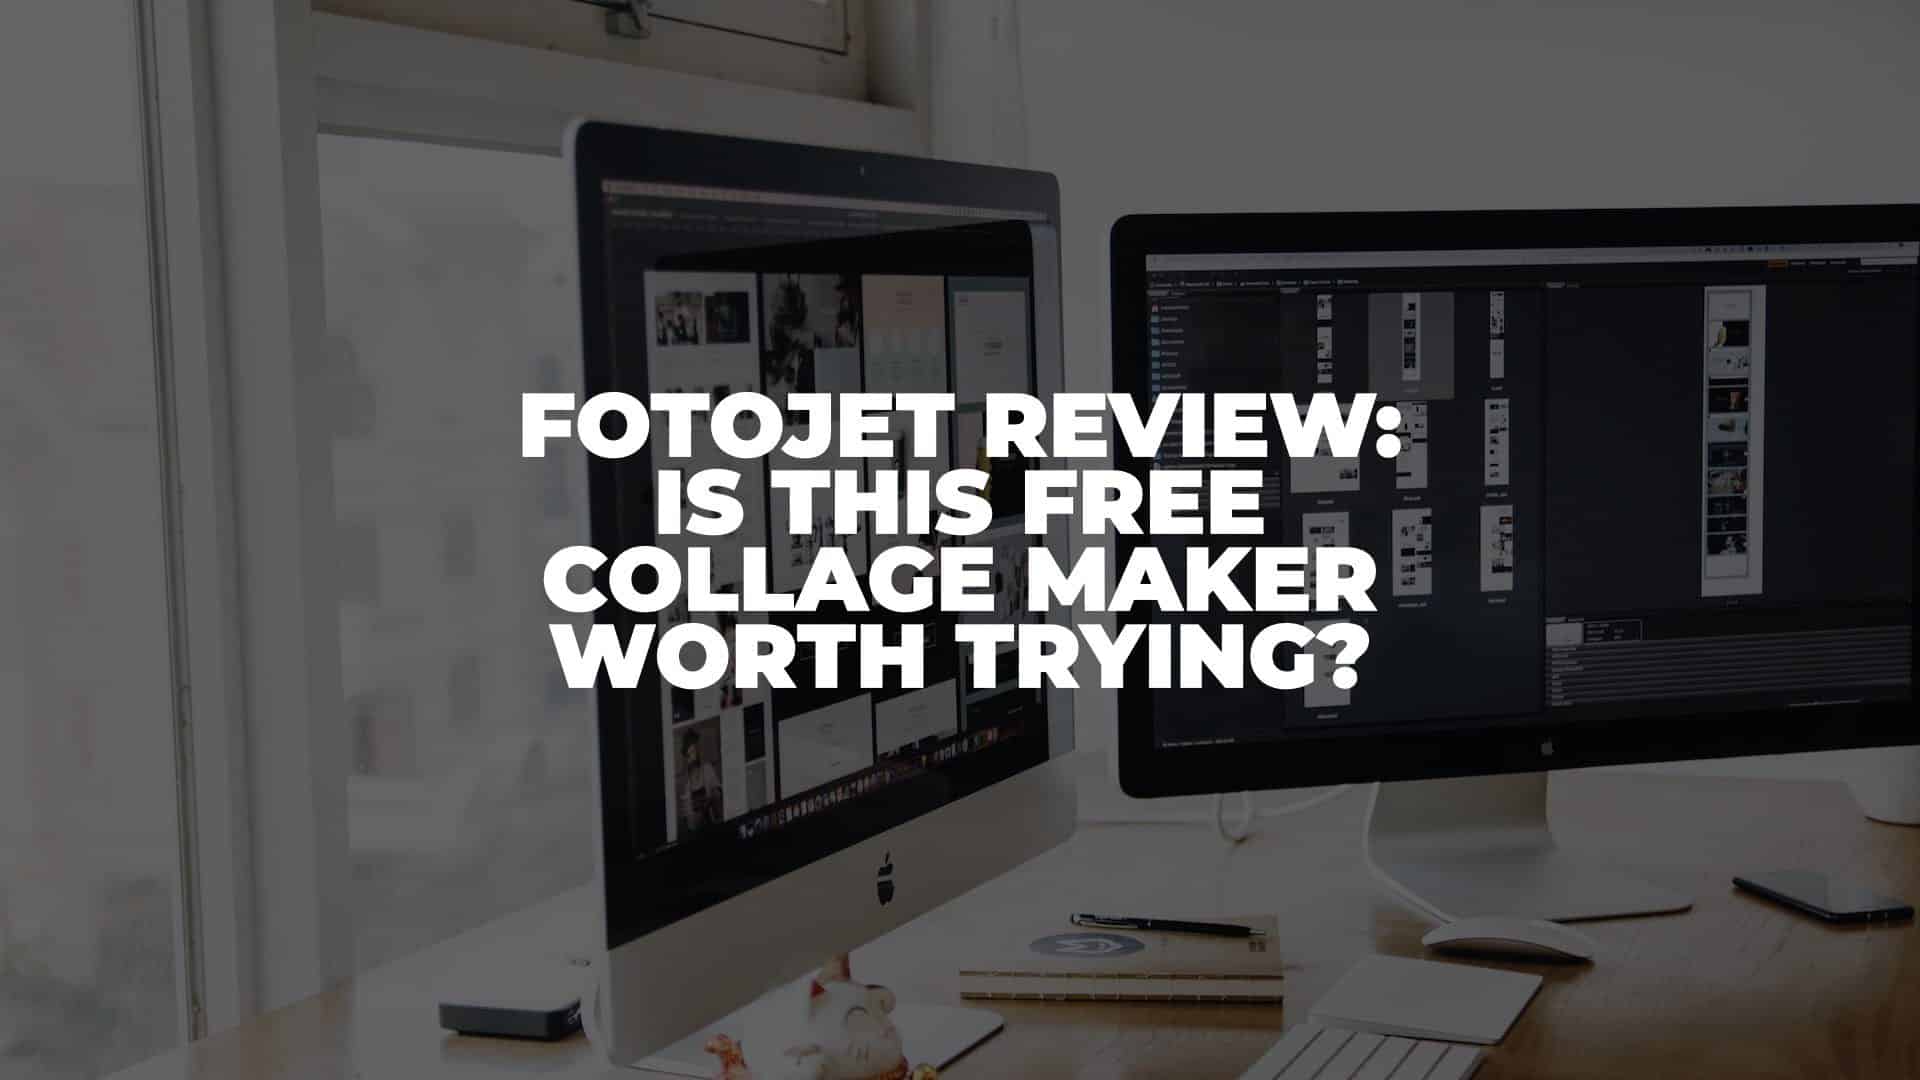 FotoJet Review - Featured Image